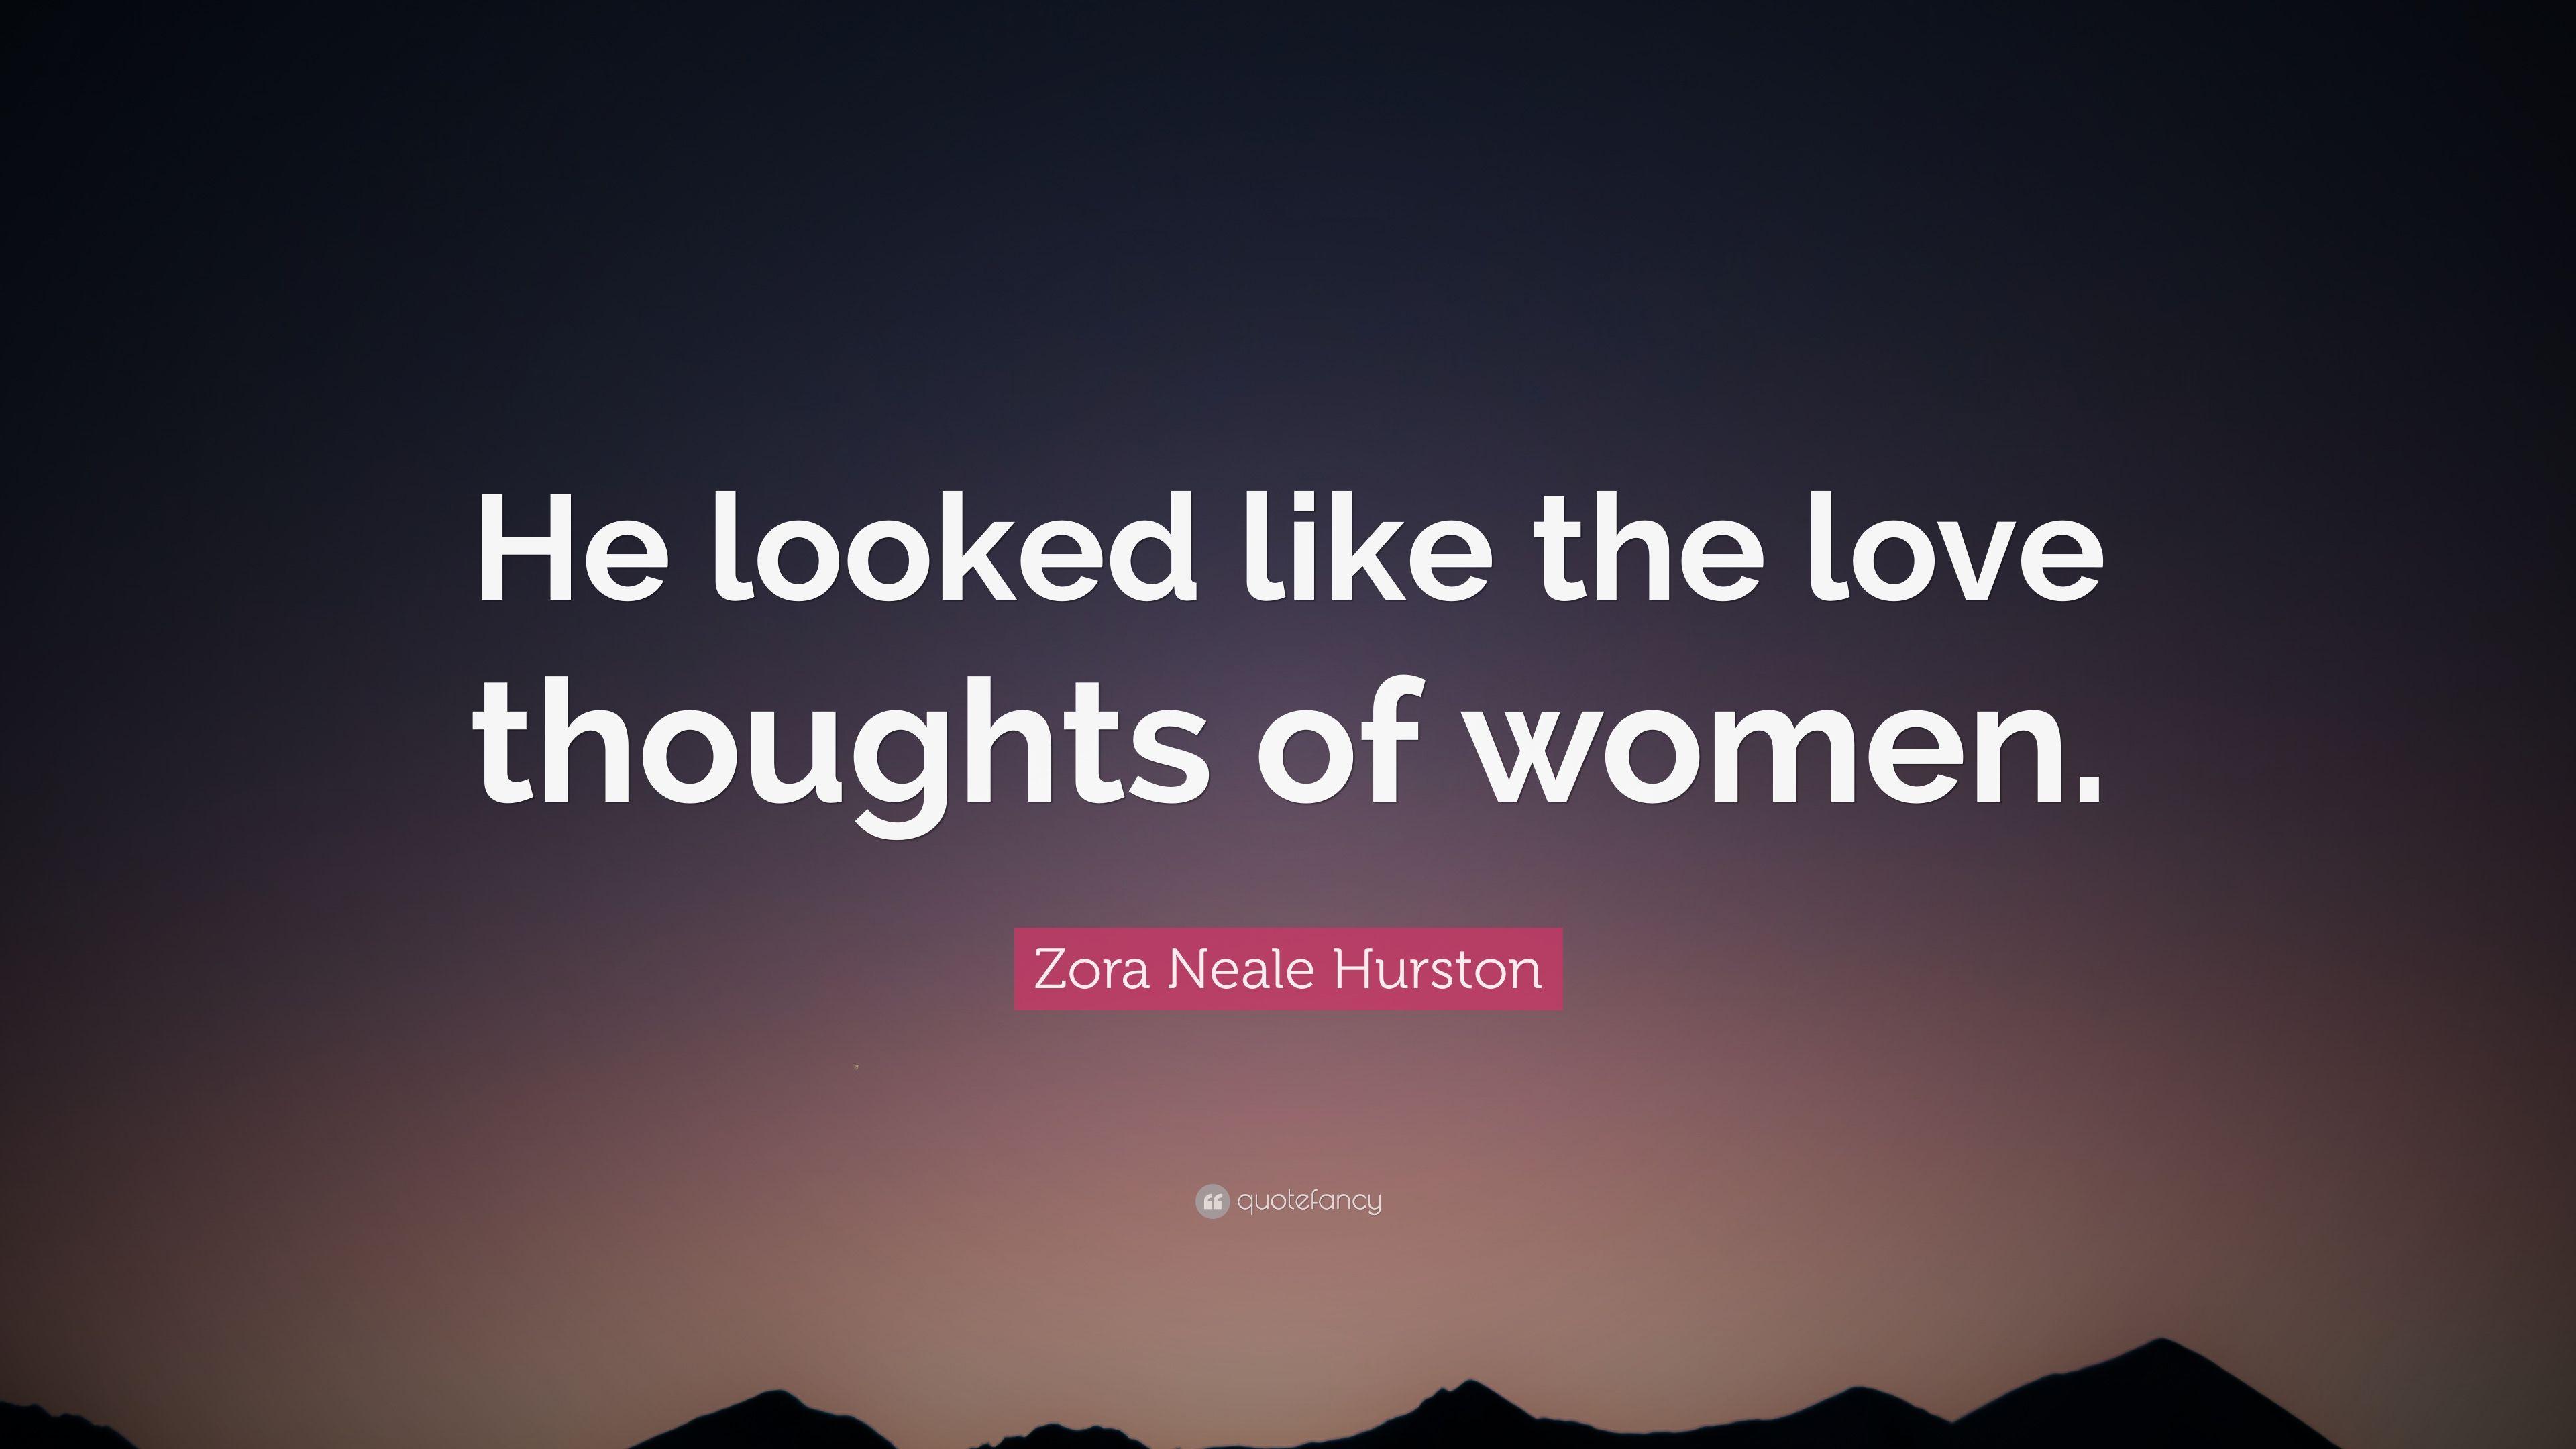 Zora Neale Hurston Quote: “He looked like the love thoughts